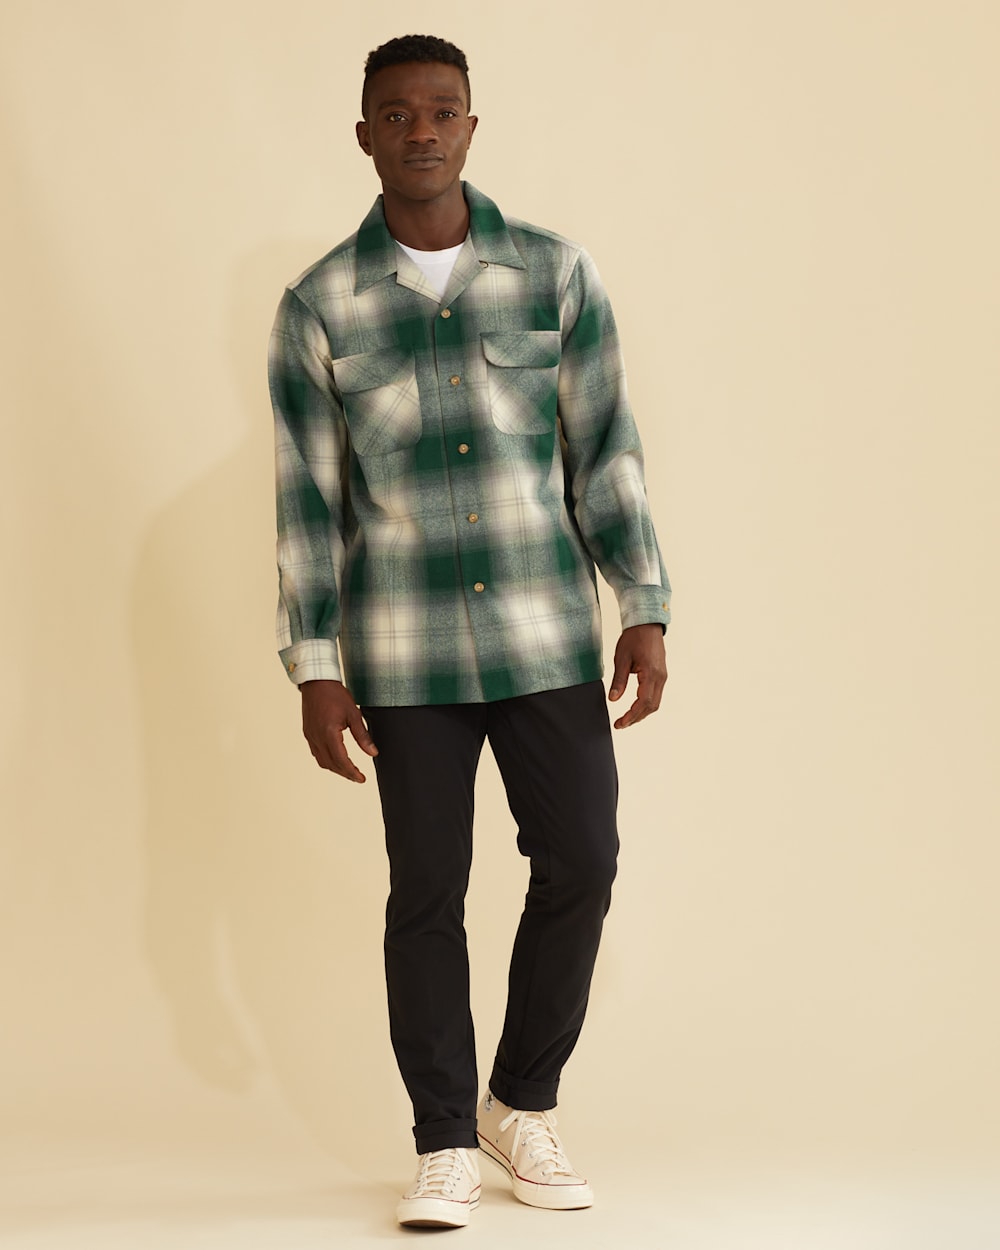 ALTERNATE VIEW OF MEN'S PLAID BOARD SHIRT IN GREEN/WHITE OMBRE image number 4